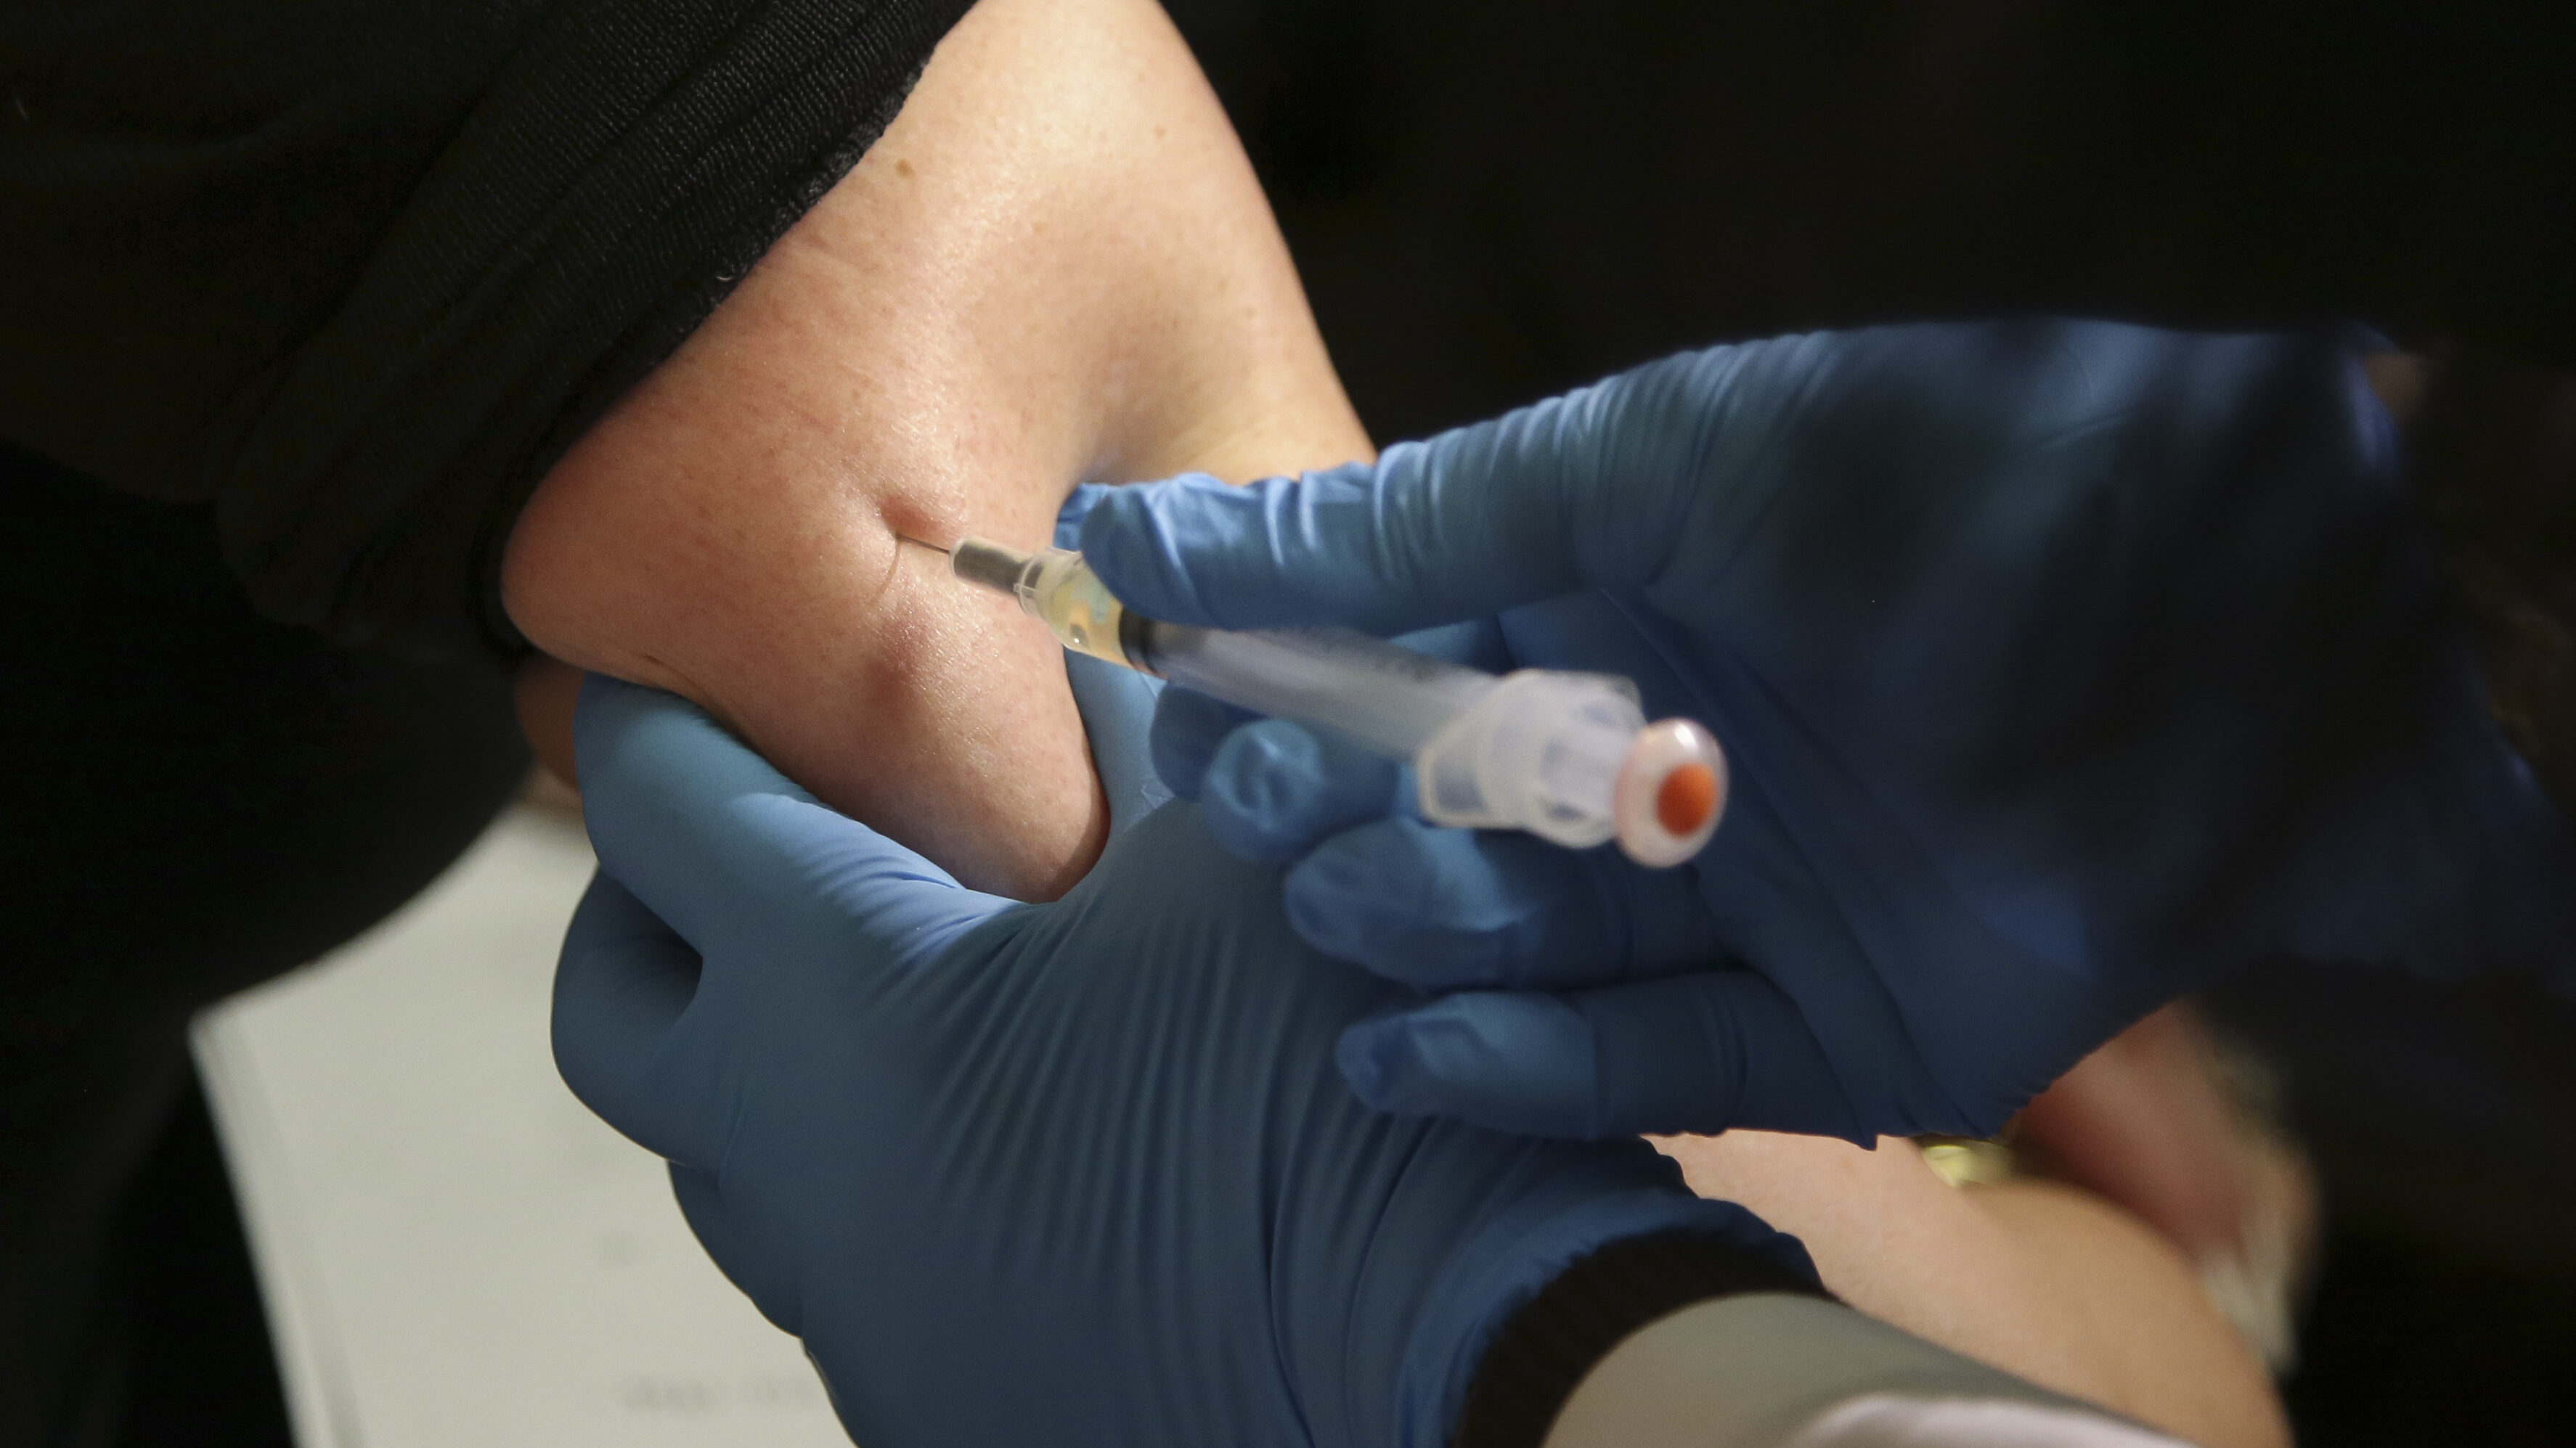 Image shows a person receiving a measles vaccine, Based on national behavior, measles cases are lik...